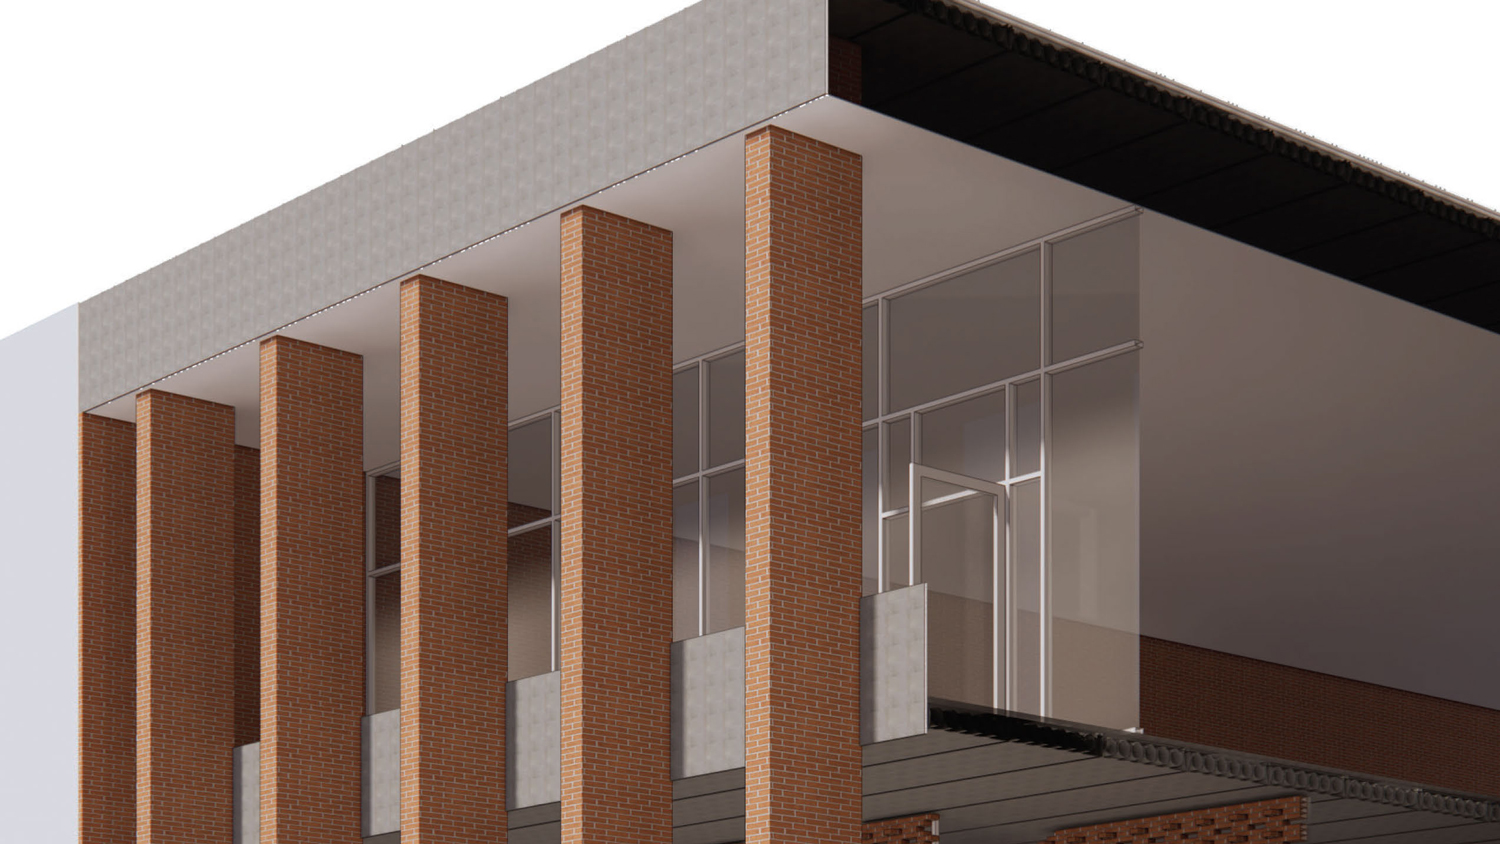 Winning student entry from the Sigmon Memorial Masonry Design Project